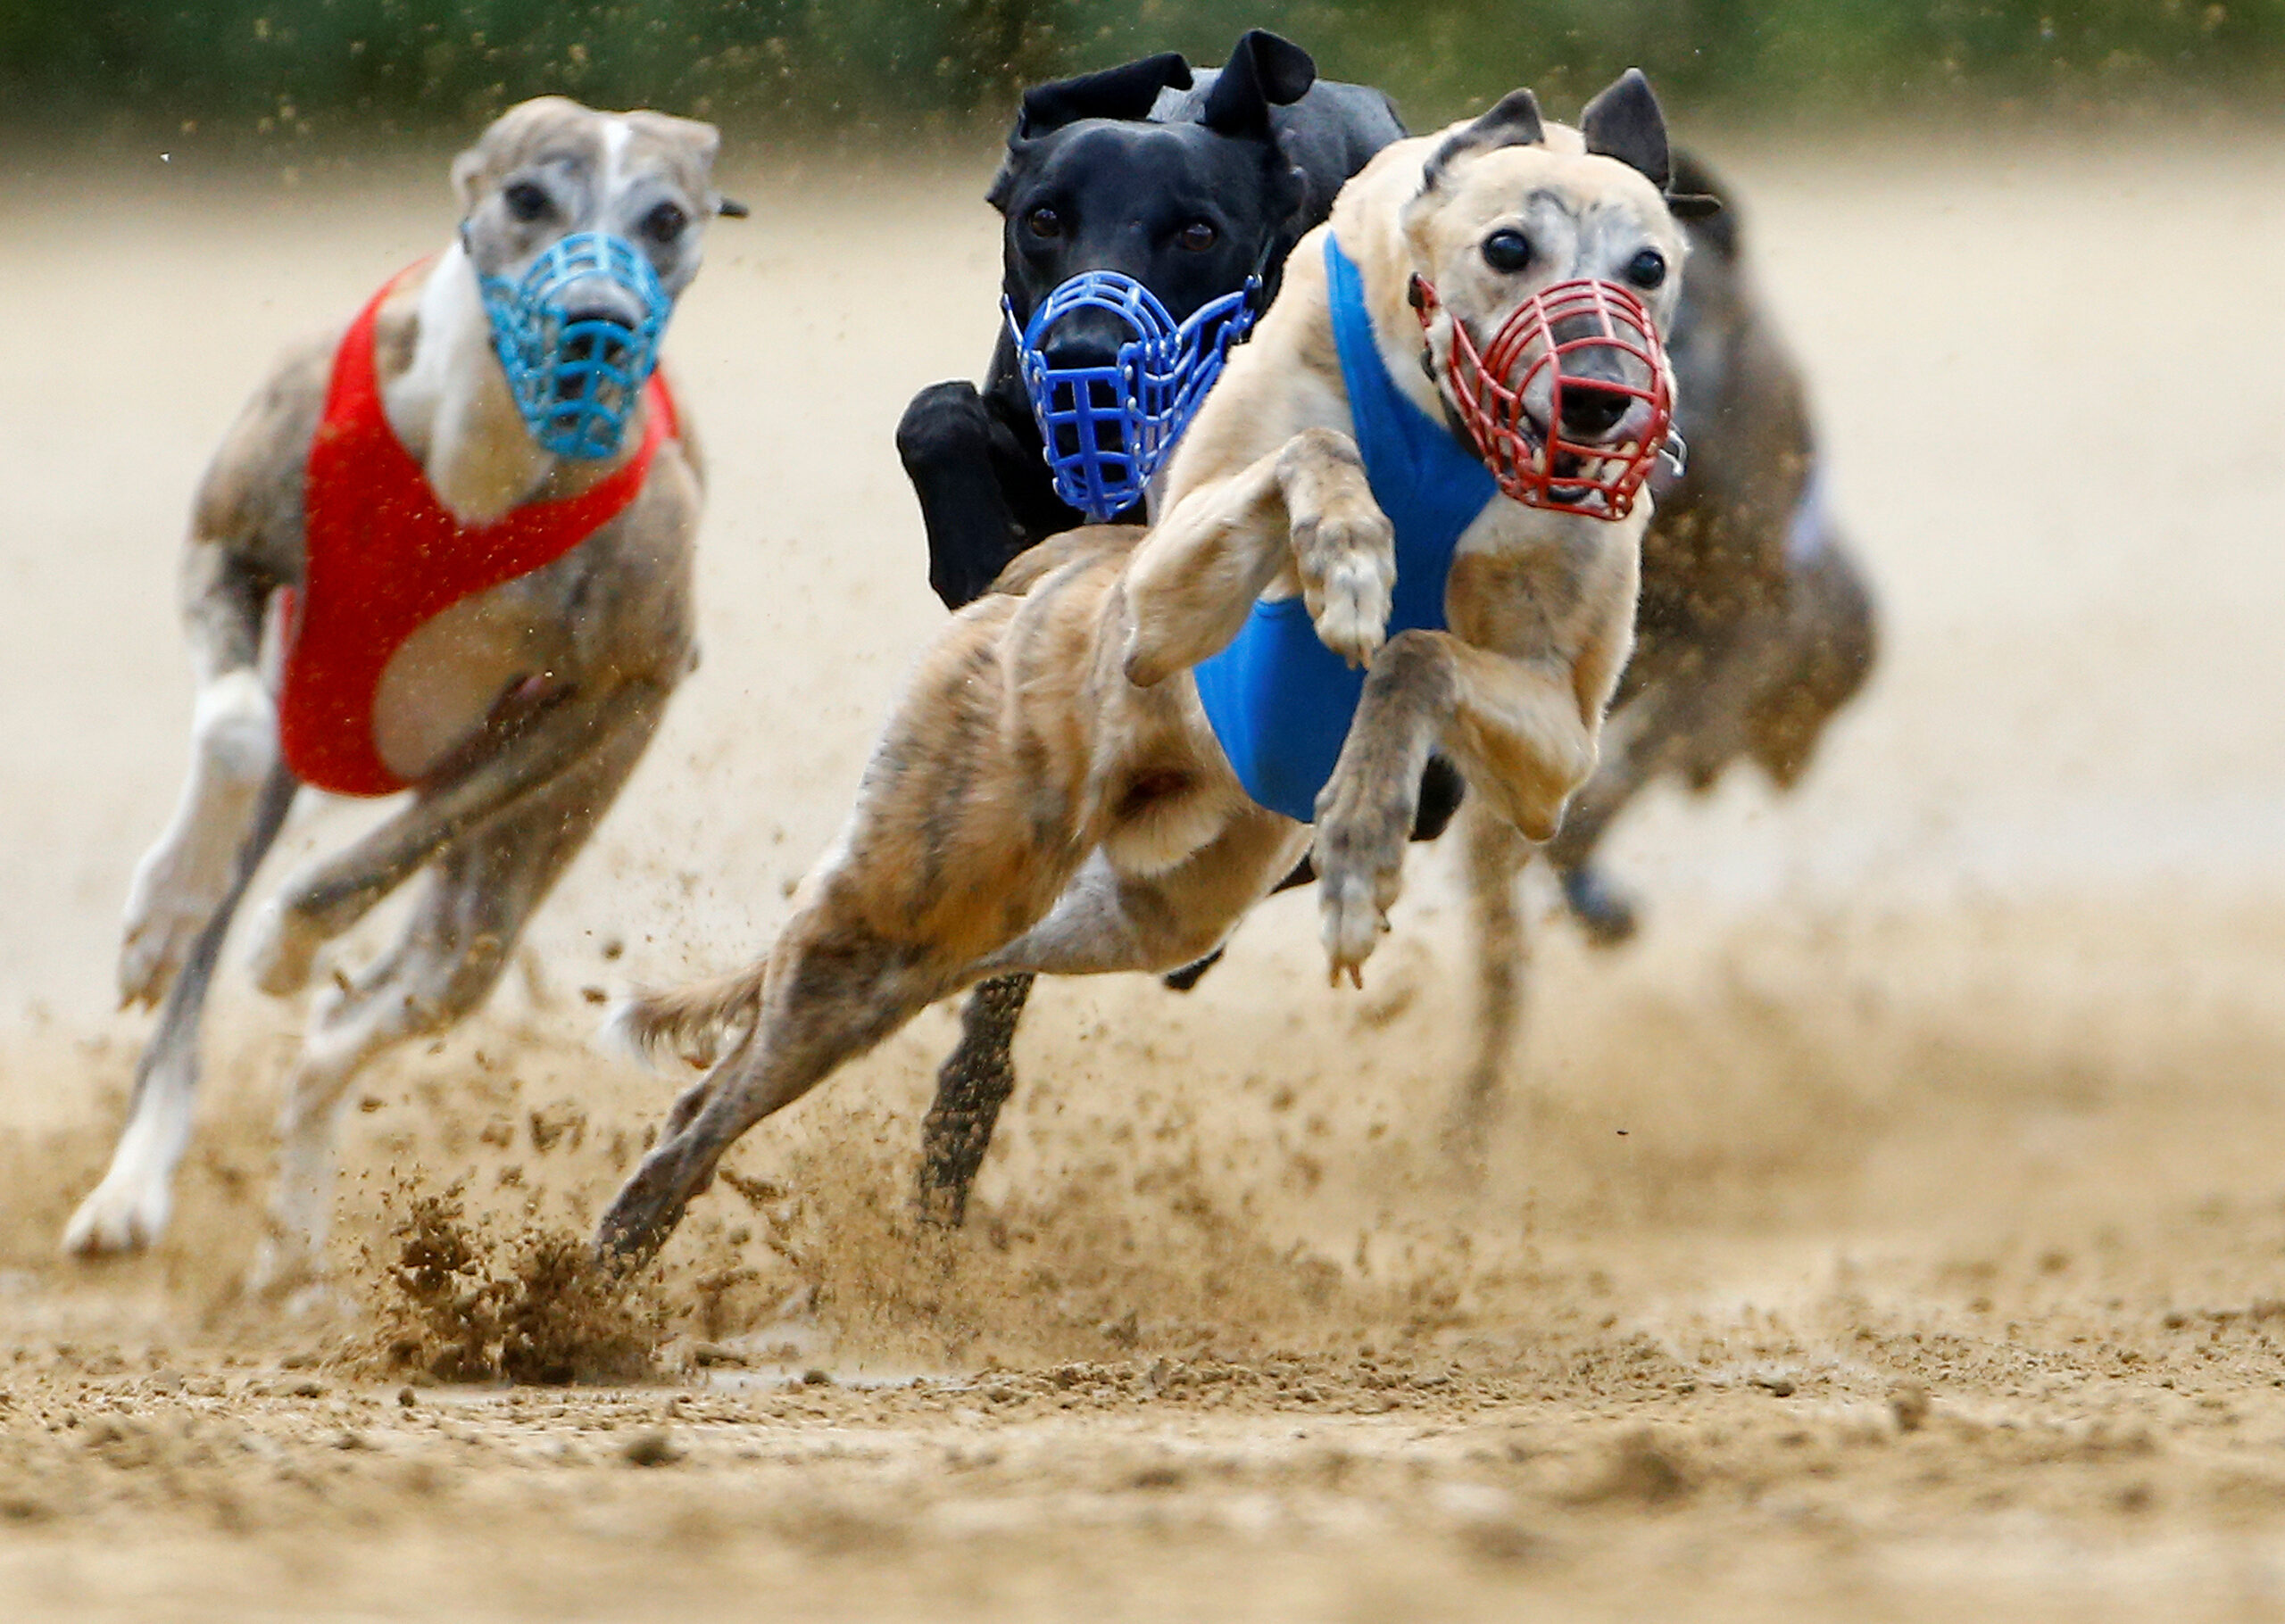 Dogs compete during an annual international dog race in Gelsenkirchen, Germany, June 9, 2019. Photo by Thilo Schmuelgen/REUTERS